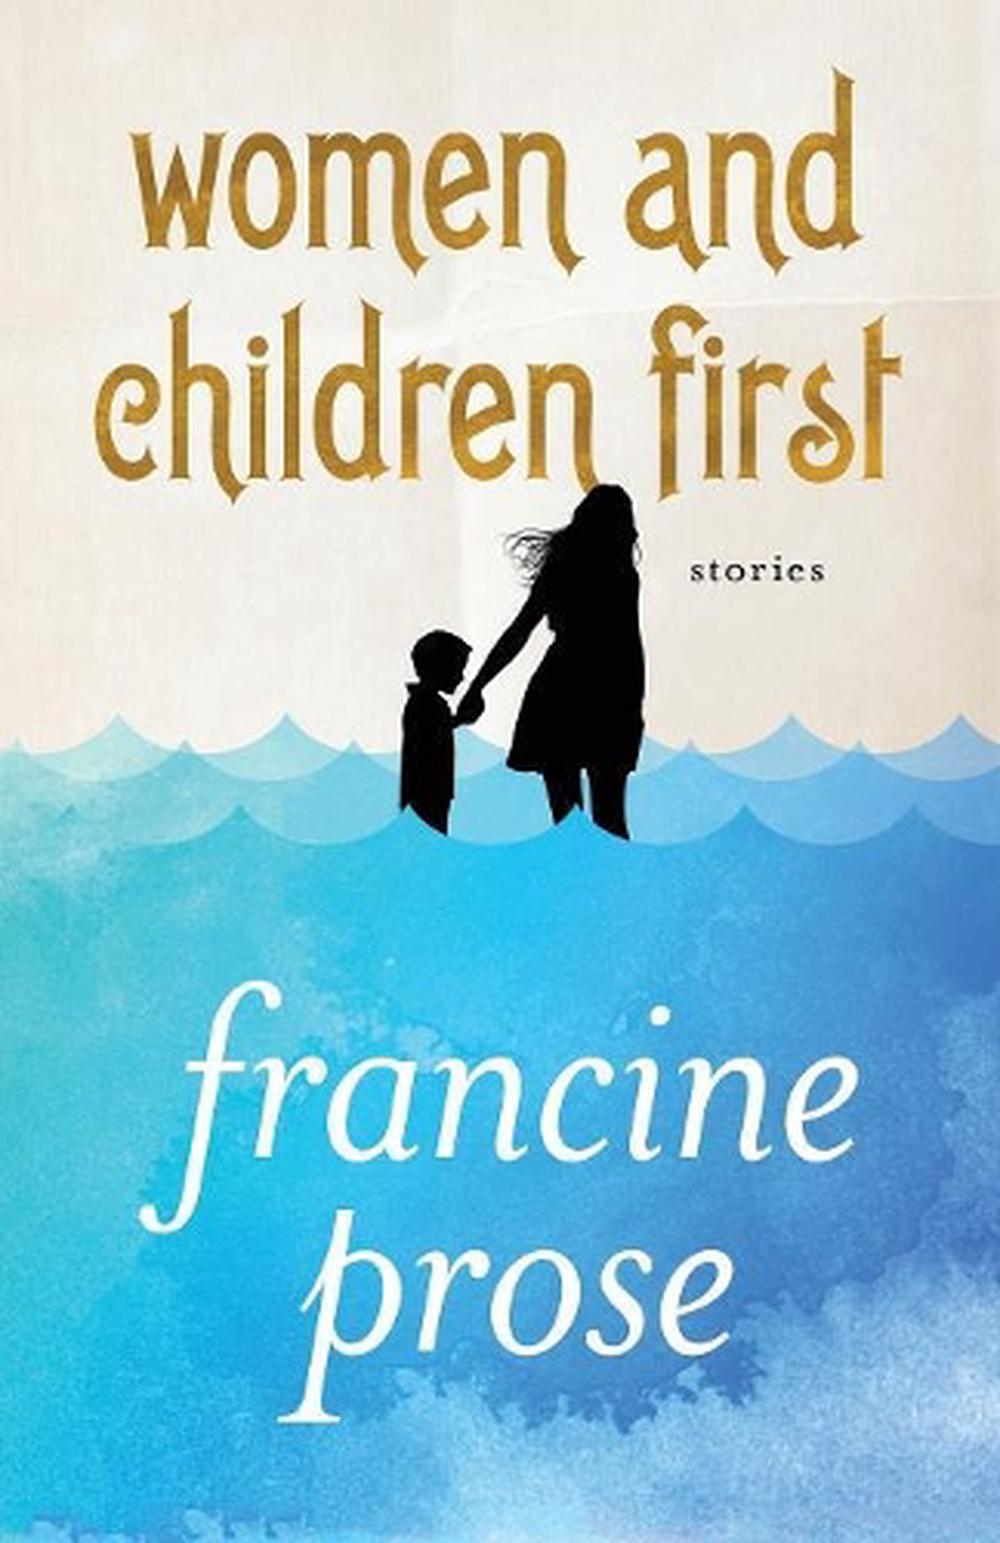 Women and Children First: Stories by Francine Prose (English) Paperback ...